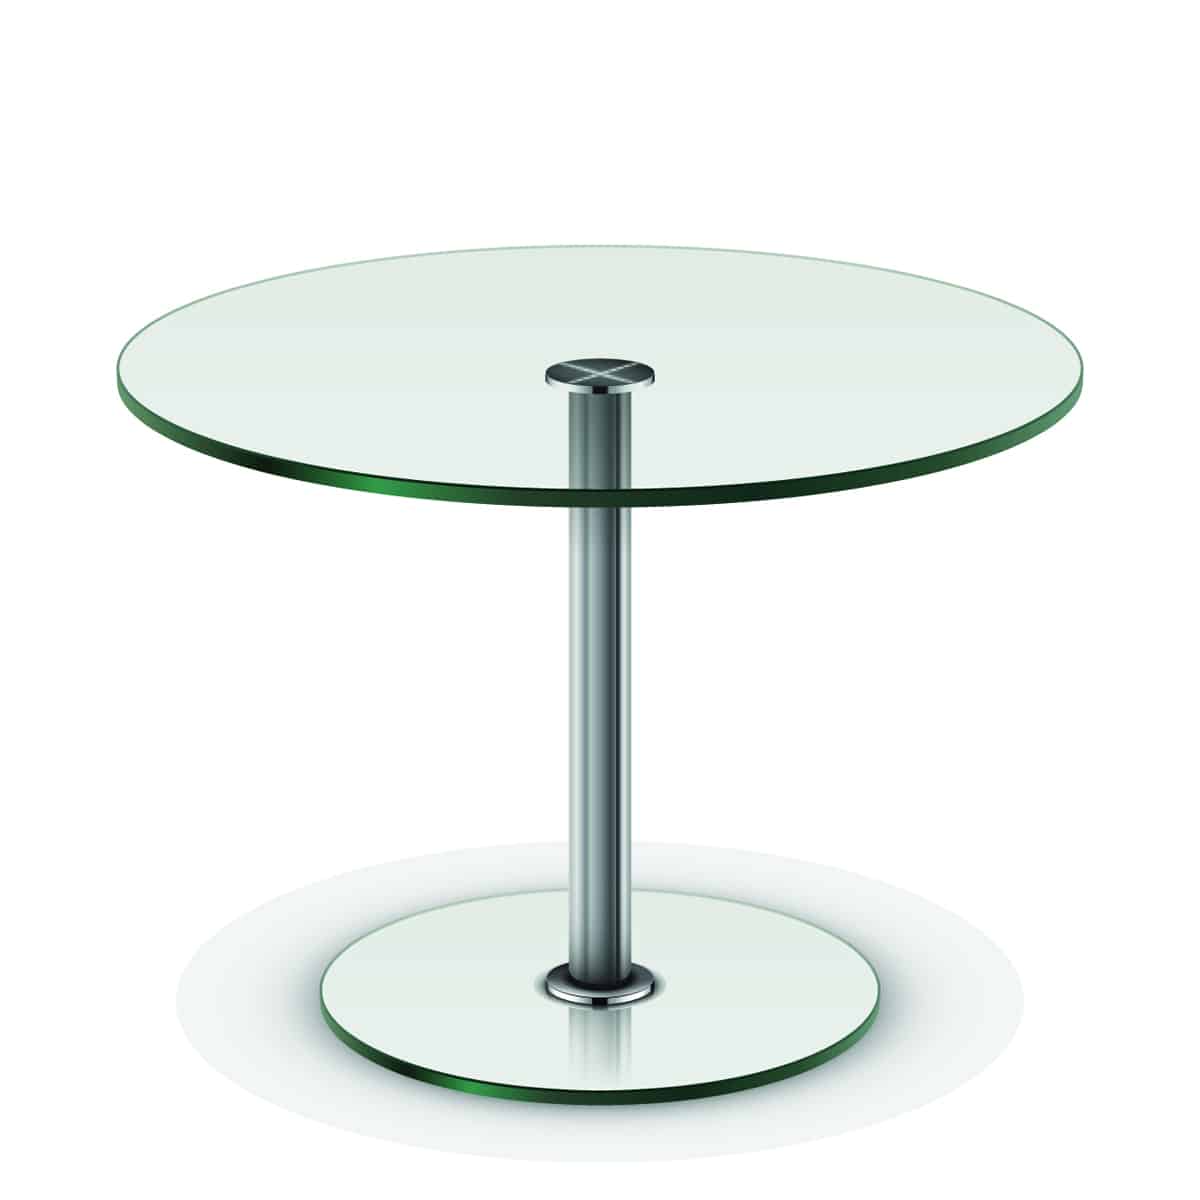 What is a Cocktail Table?